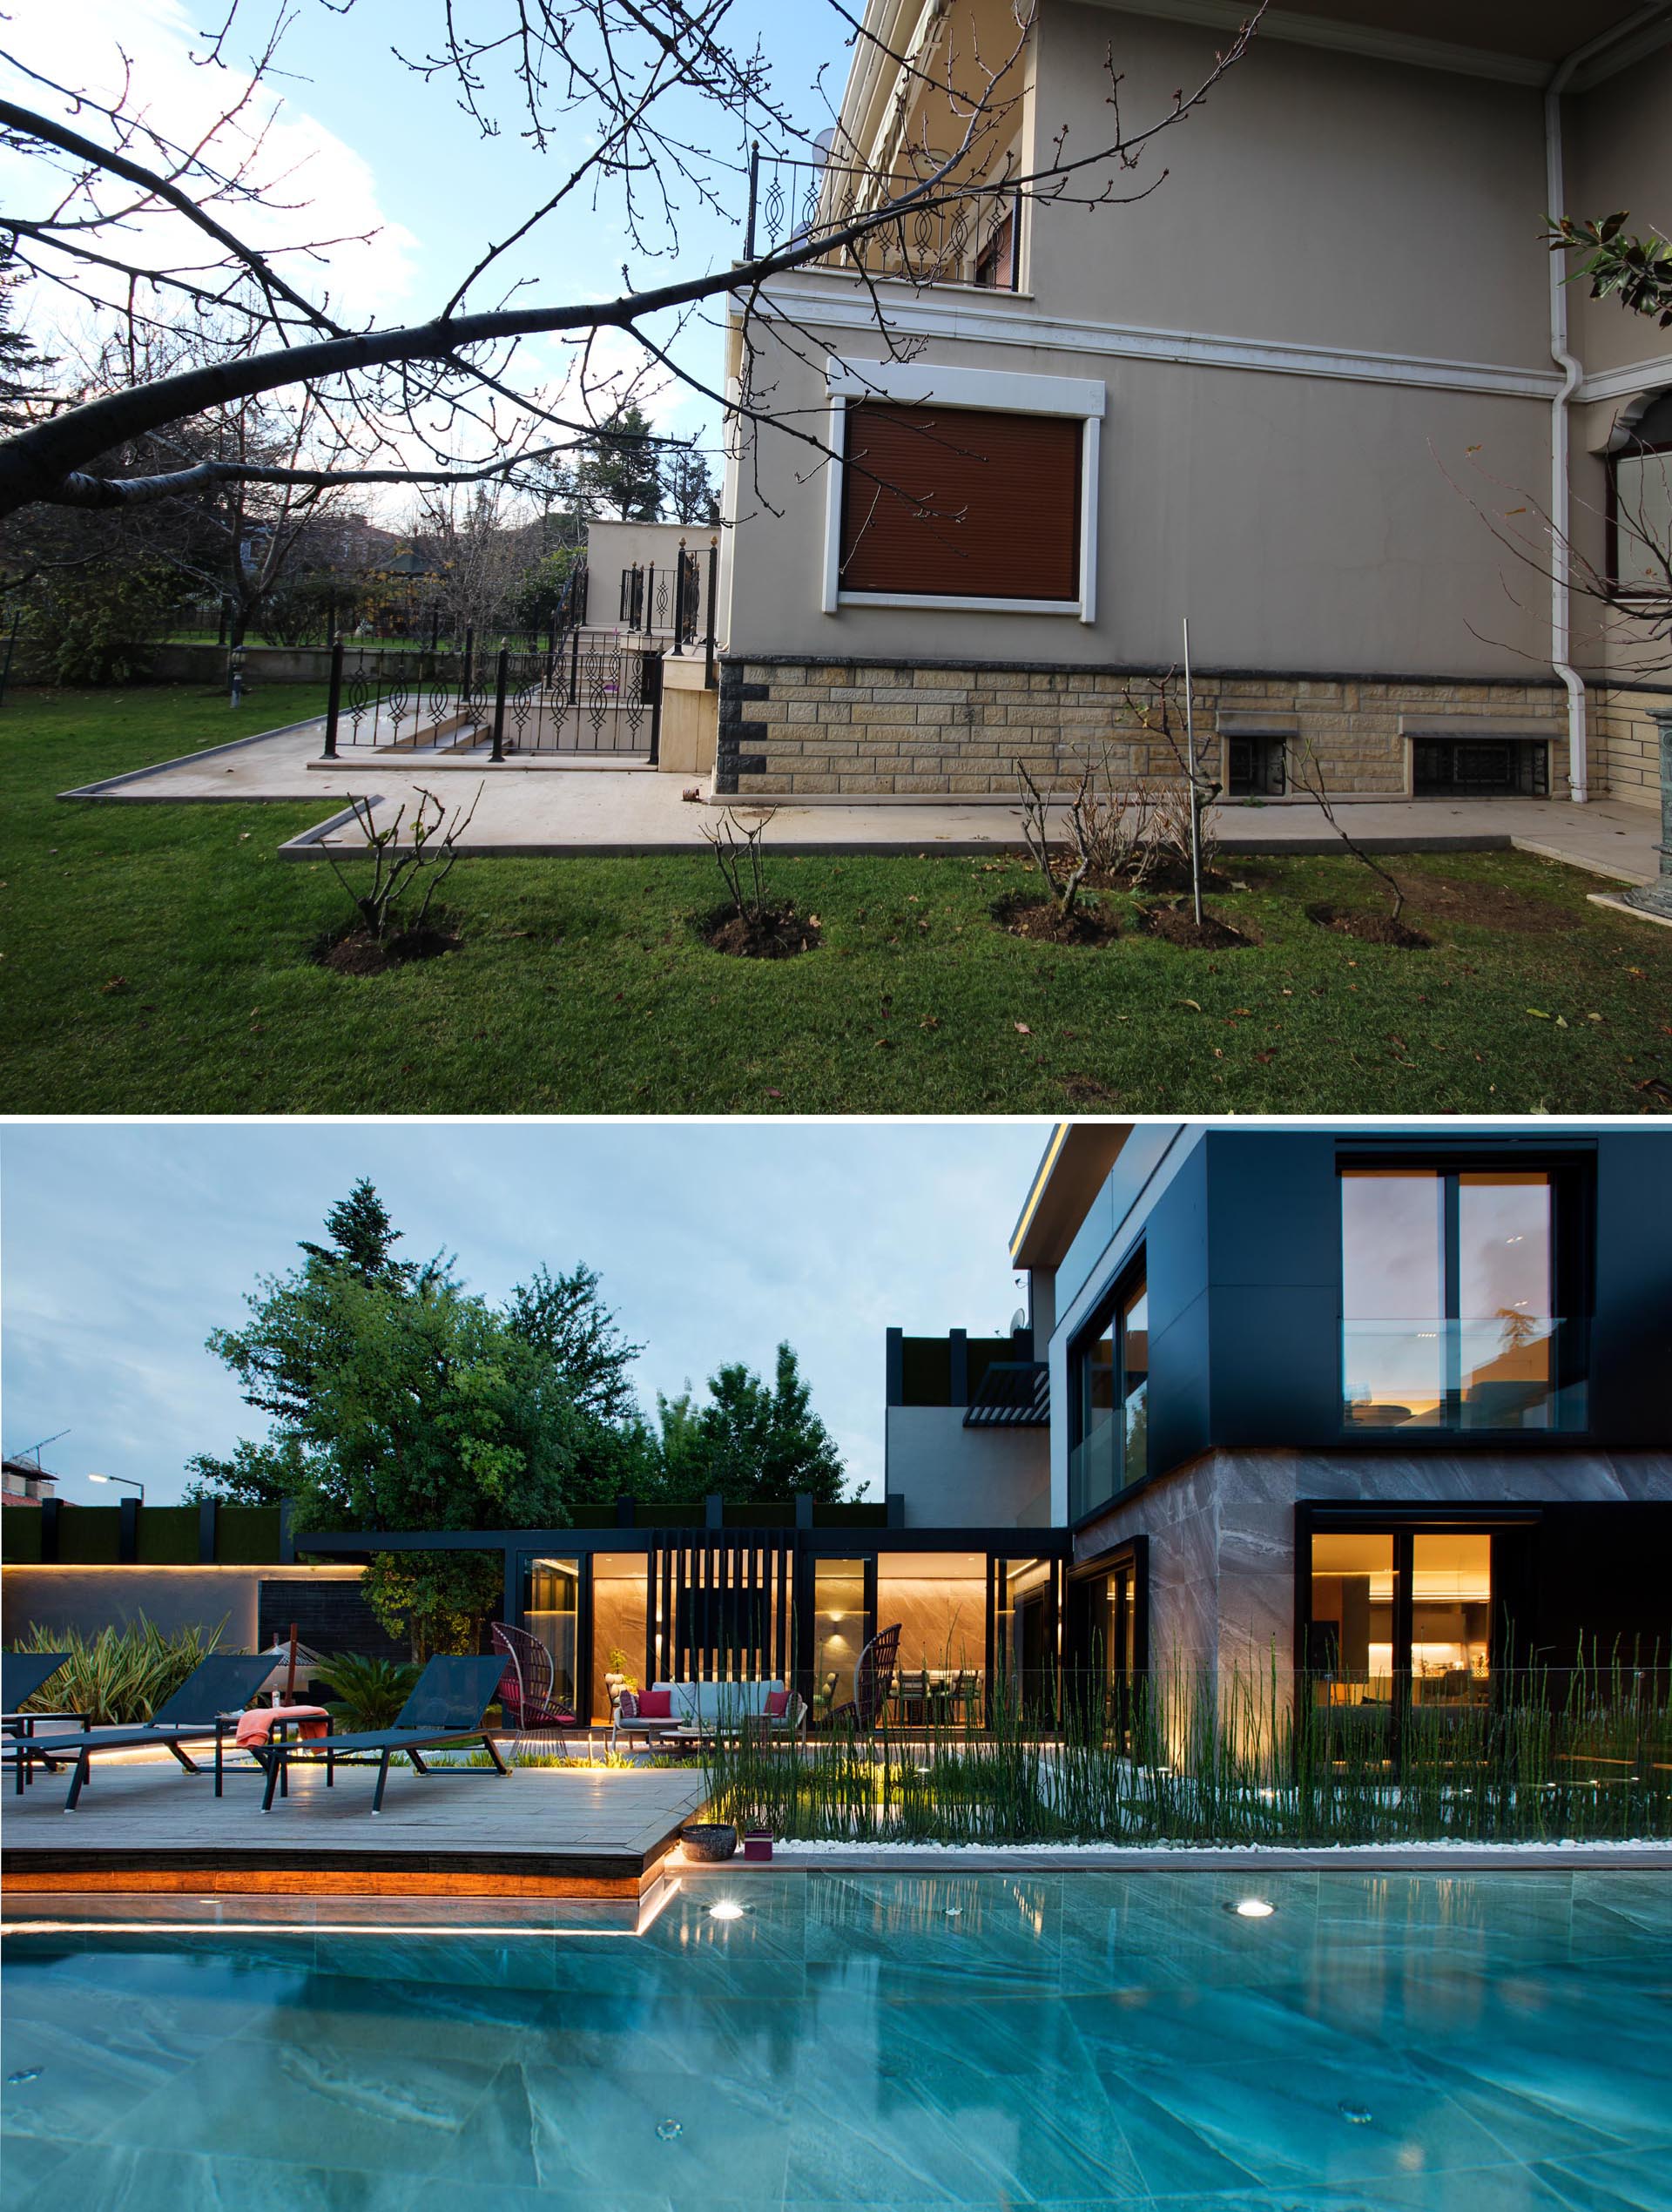 A modern house and yard renovation that includes a sunbathing deck and swimming pool.